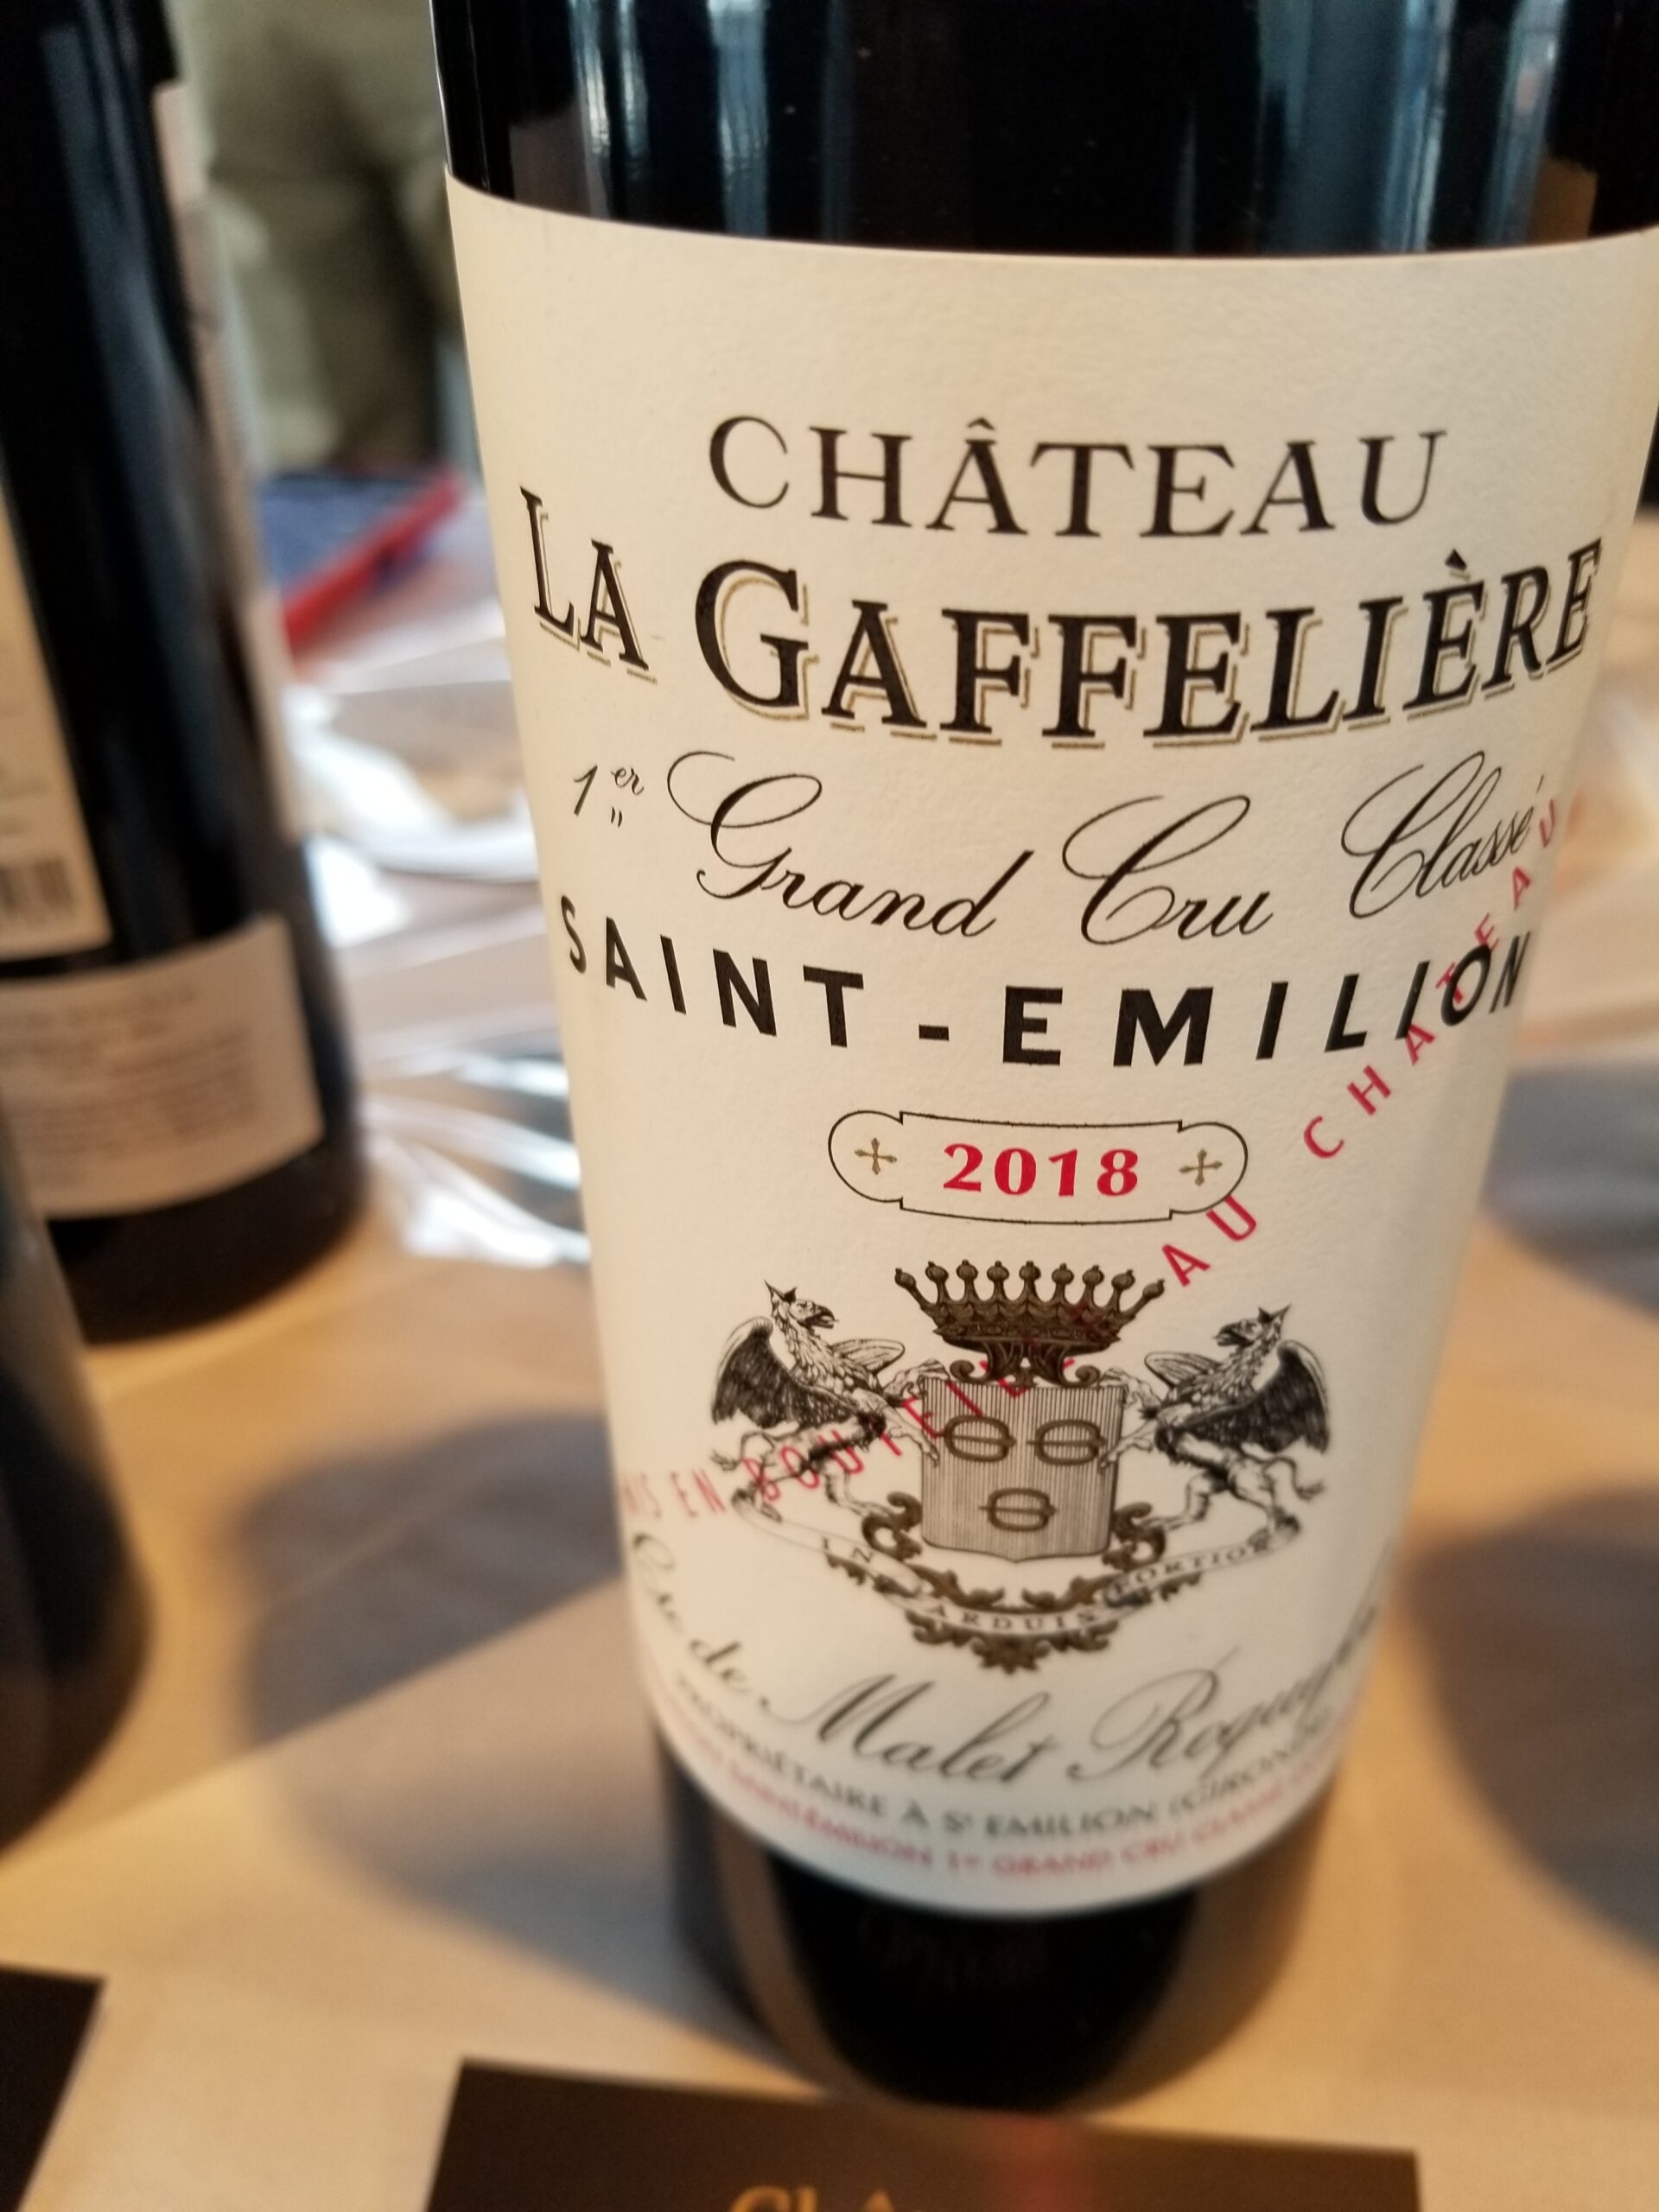 off Wines Now Fresh Available Look at Bordeaux – A 2018 Bottling Line: the Review TerroirSense the Wine